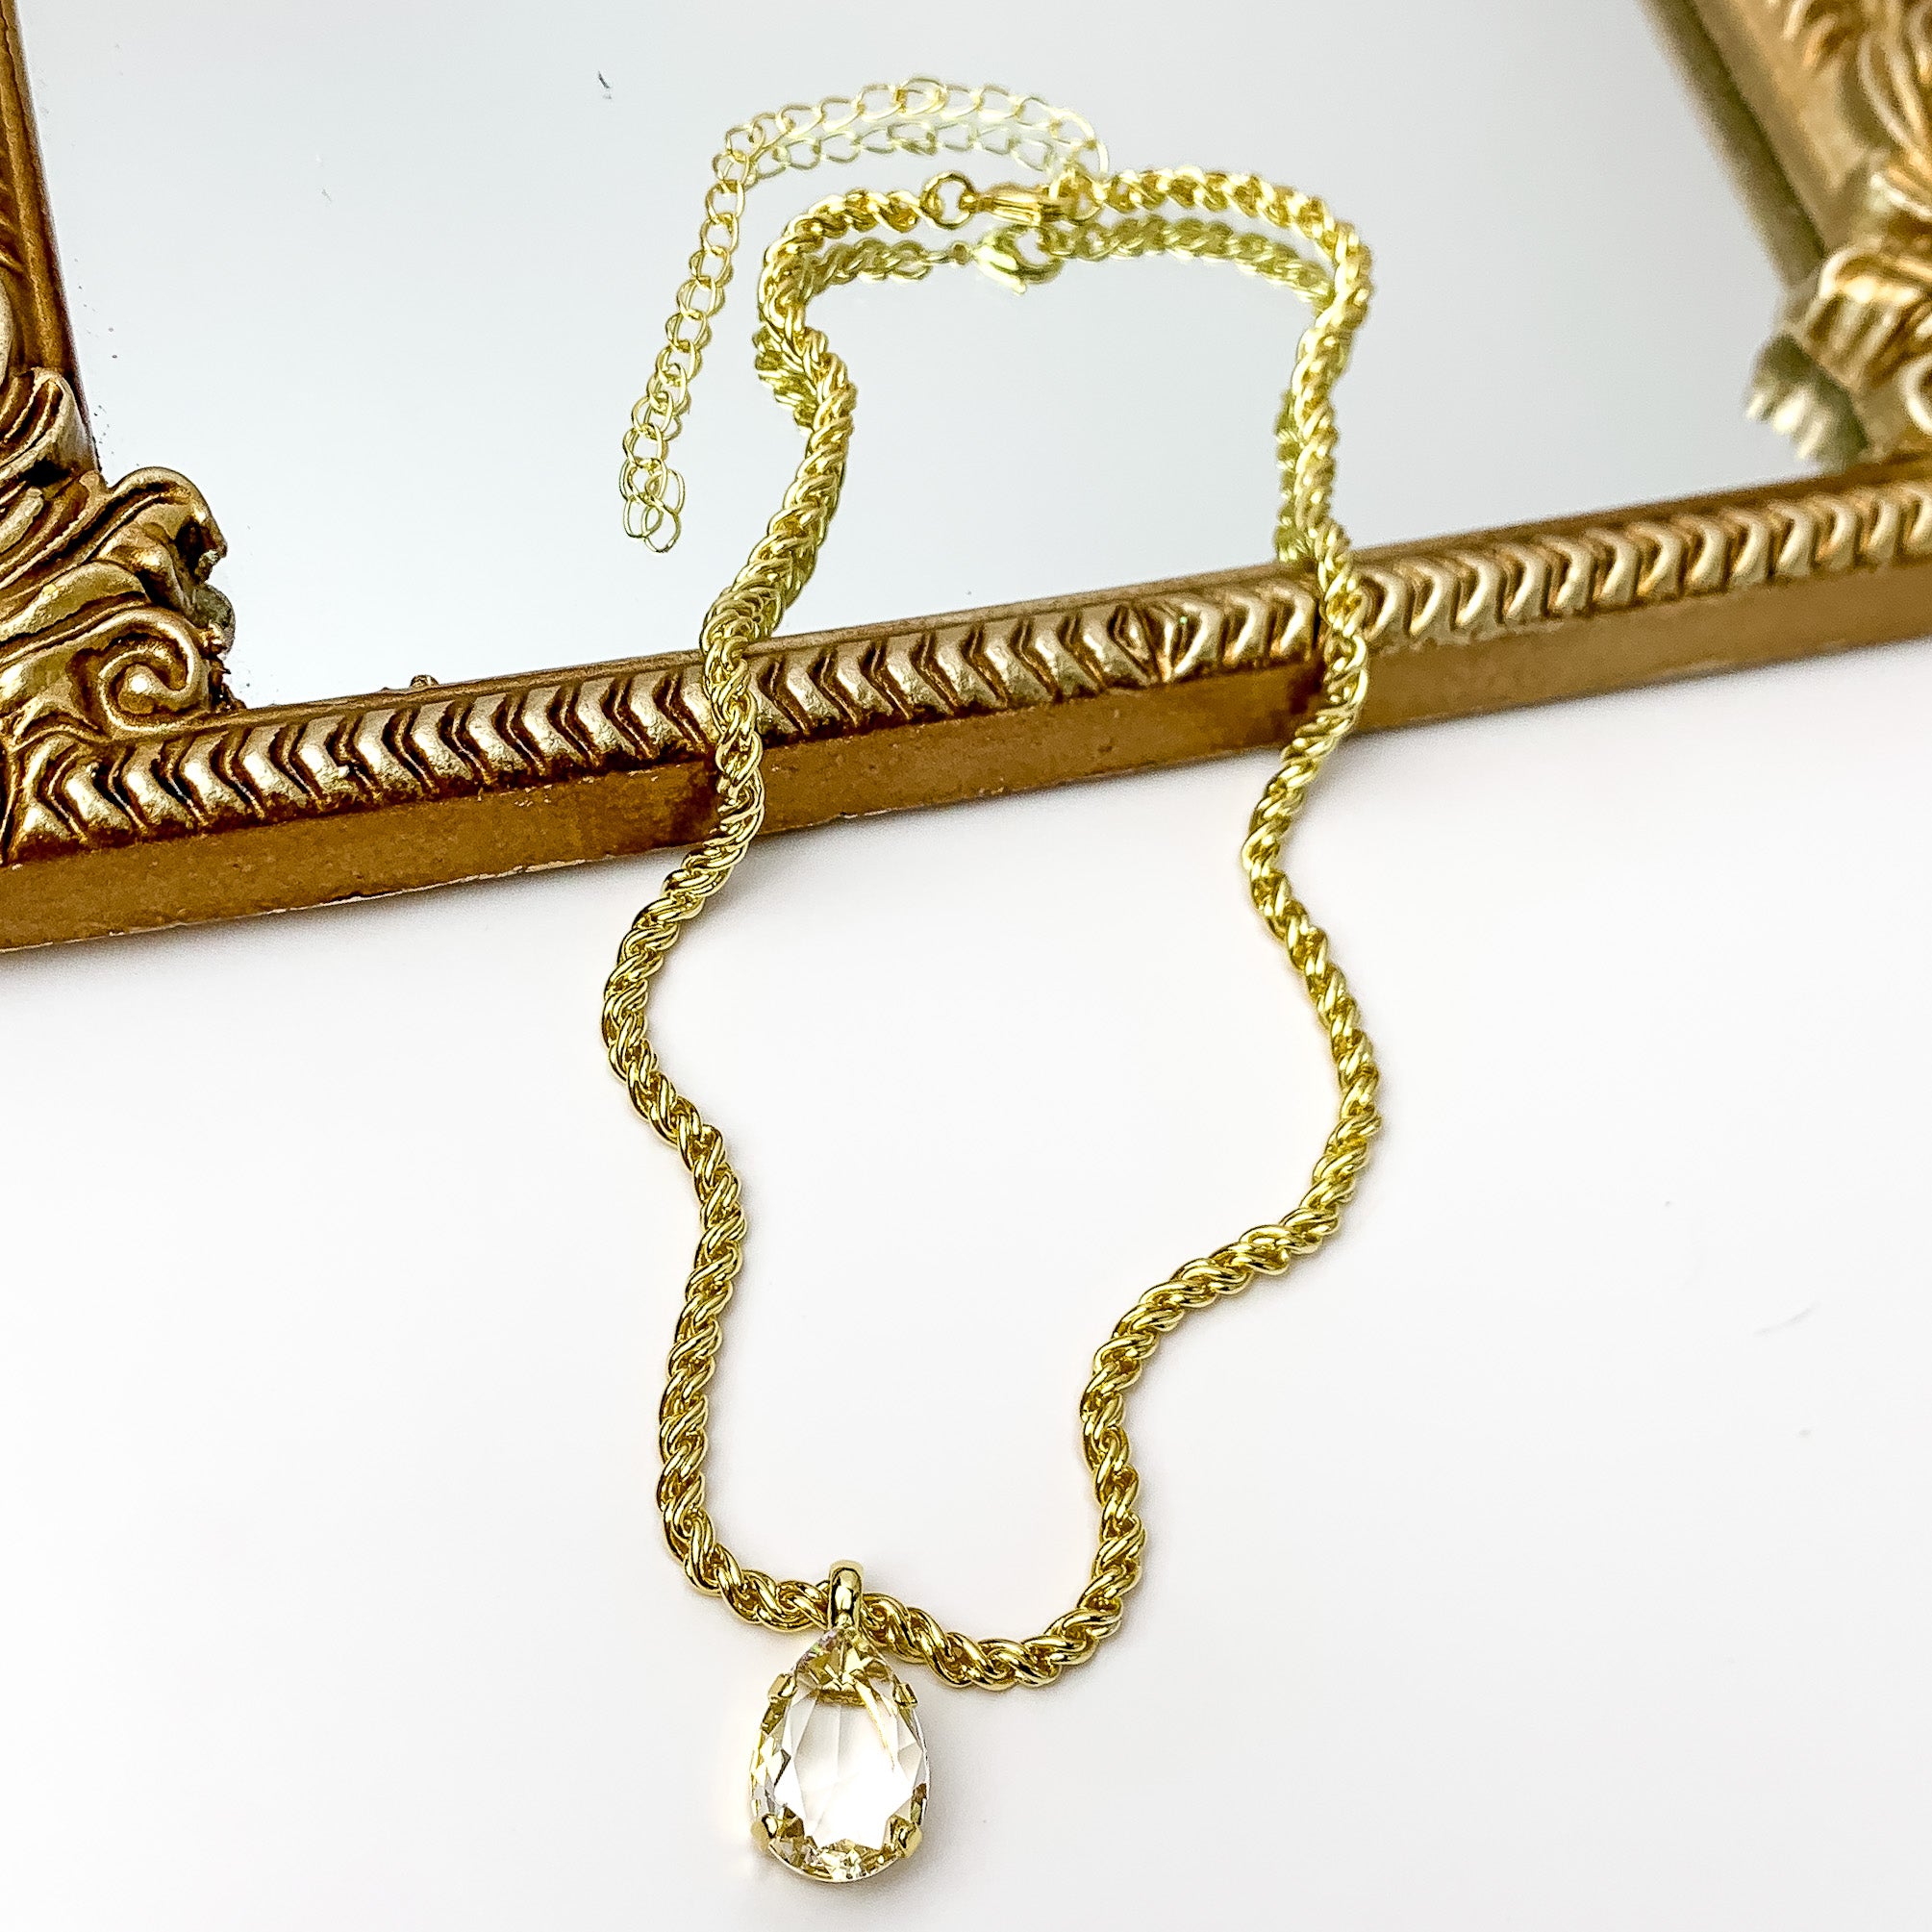 Gold necklace with clear crystal pendant in the middle. Pictured on a white background with a mirror at the top.